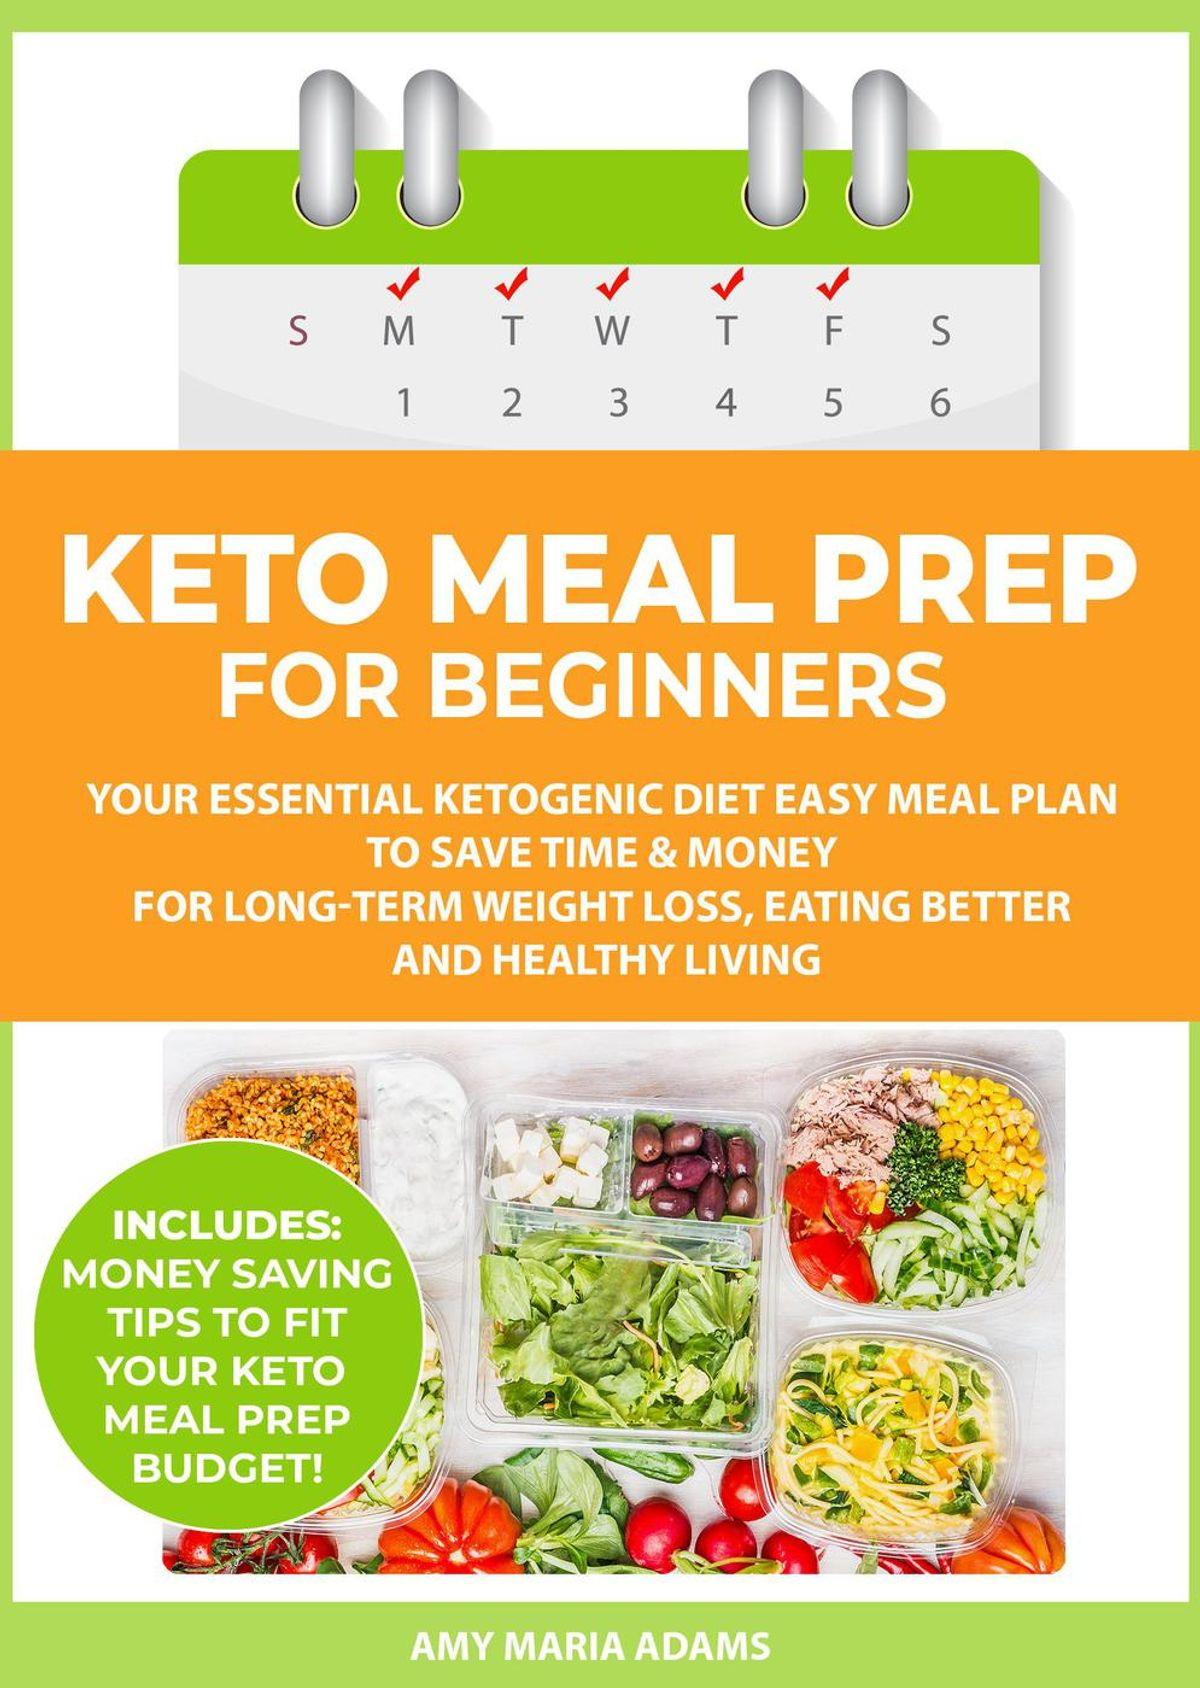 Keto Diet Meal Prep For Beginners
 Keto Meal Prep for Beginners Your Essential Ketogenic